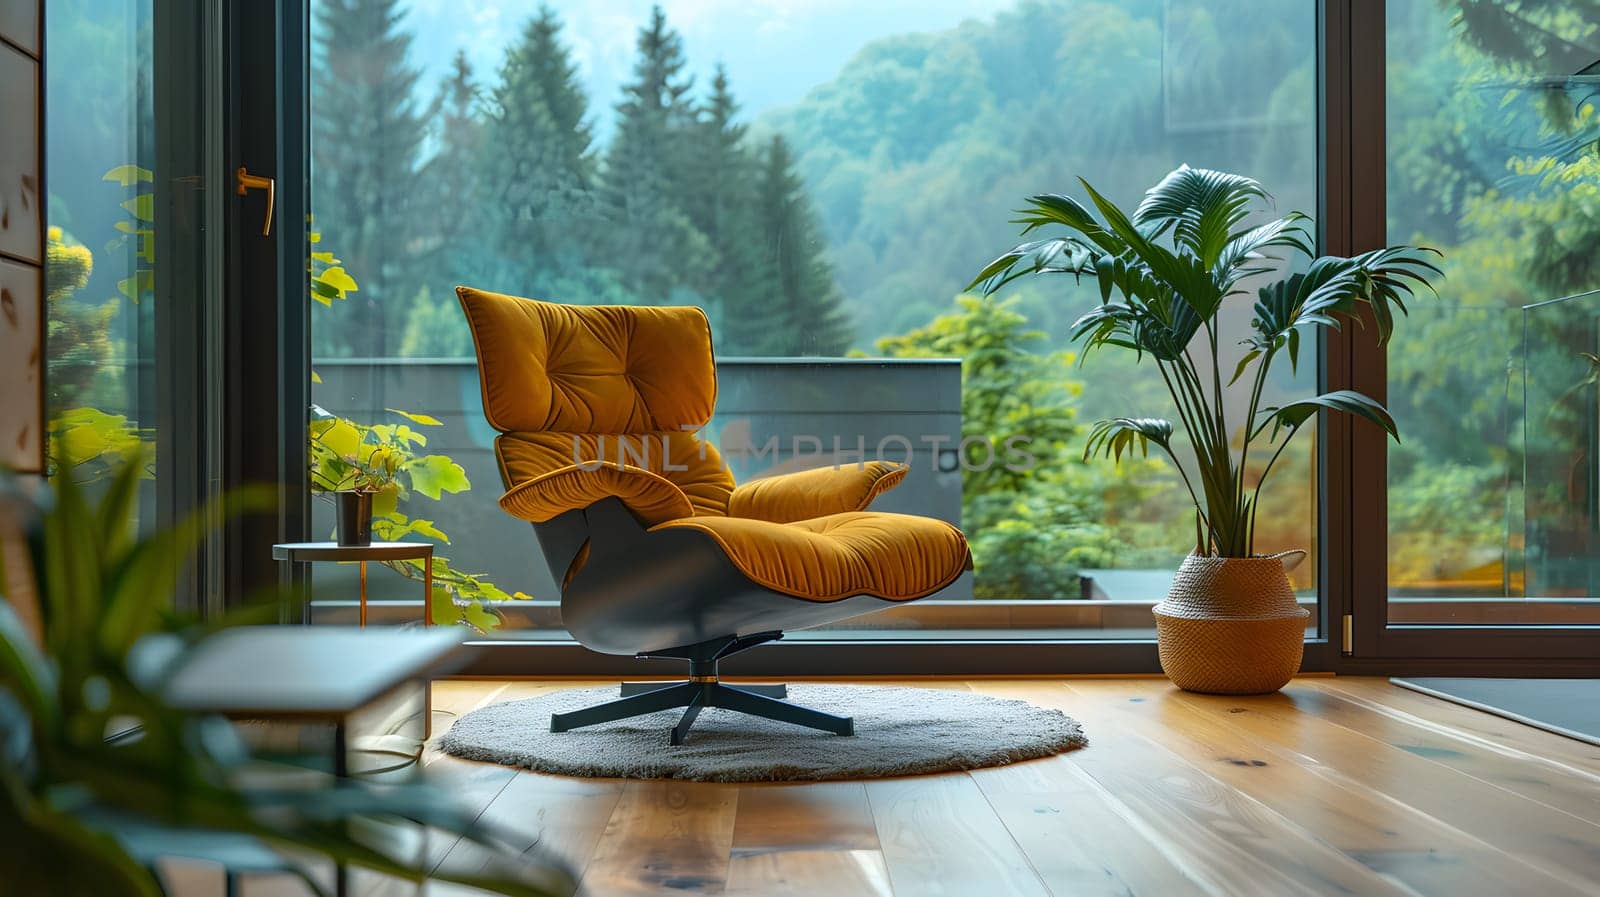 A yellow chair adds a pop of color to the living room, positioned next to a window with a view of the natural landscape outside